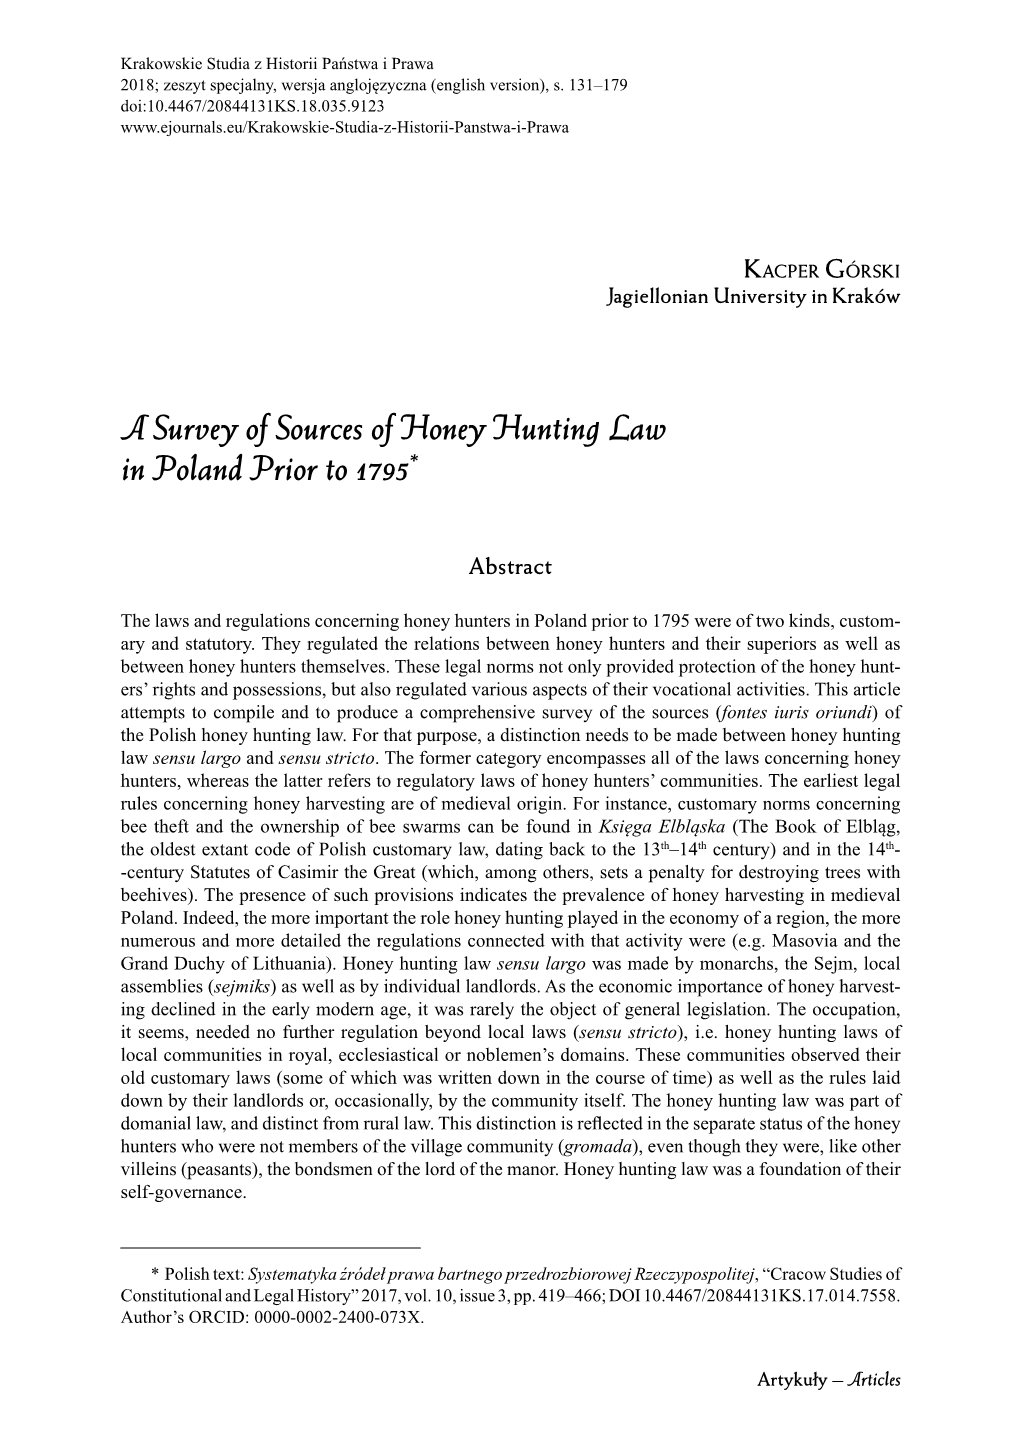 A Survey of Sources of Honey Hunting Law in Poland Prior to 1795*